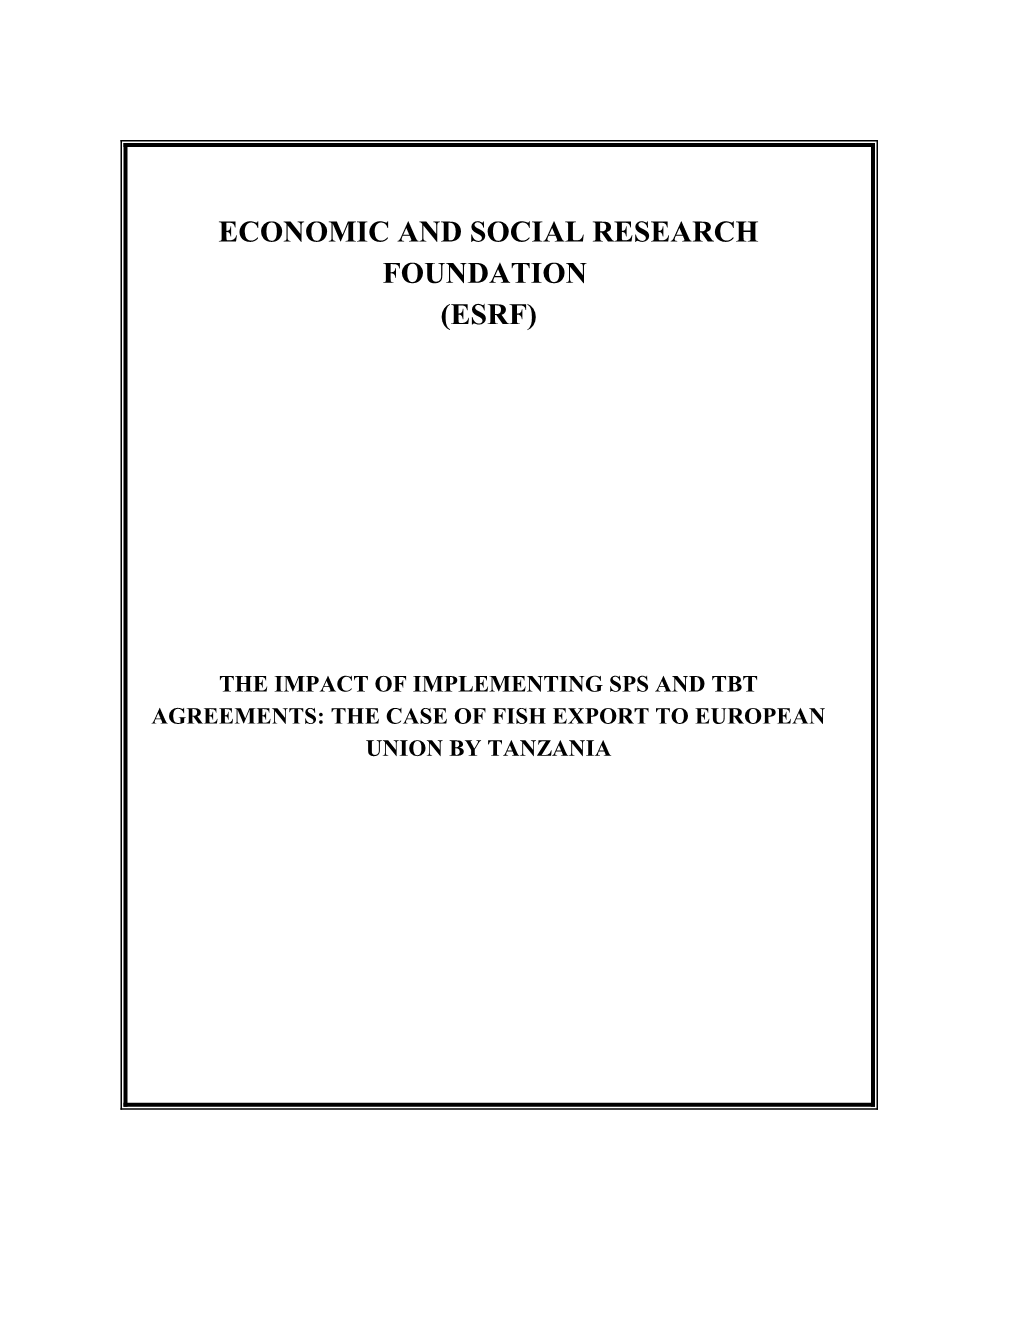 Economic and Social Research Foundation